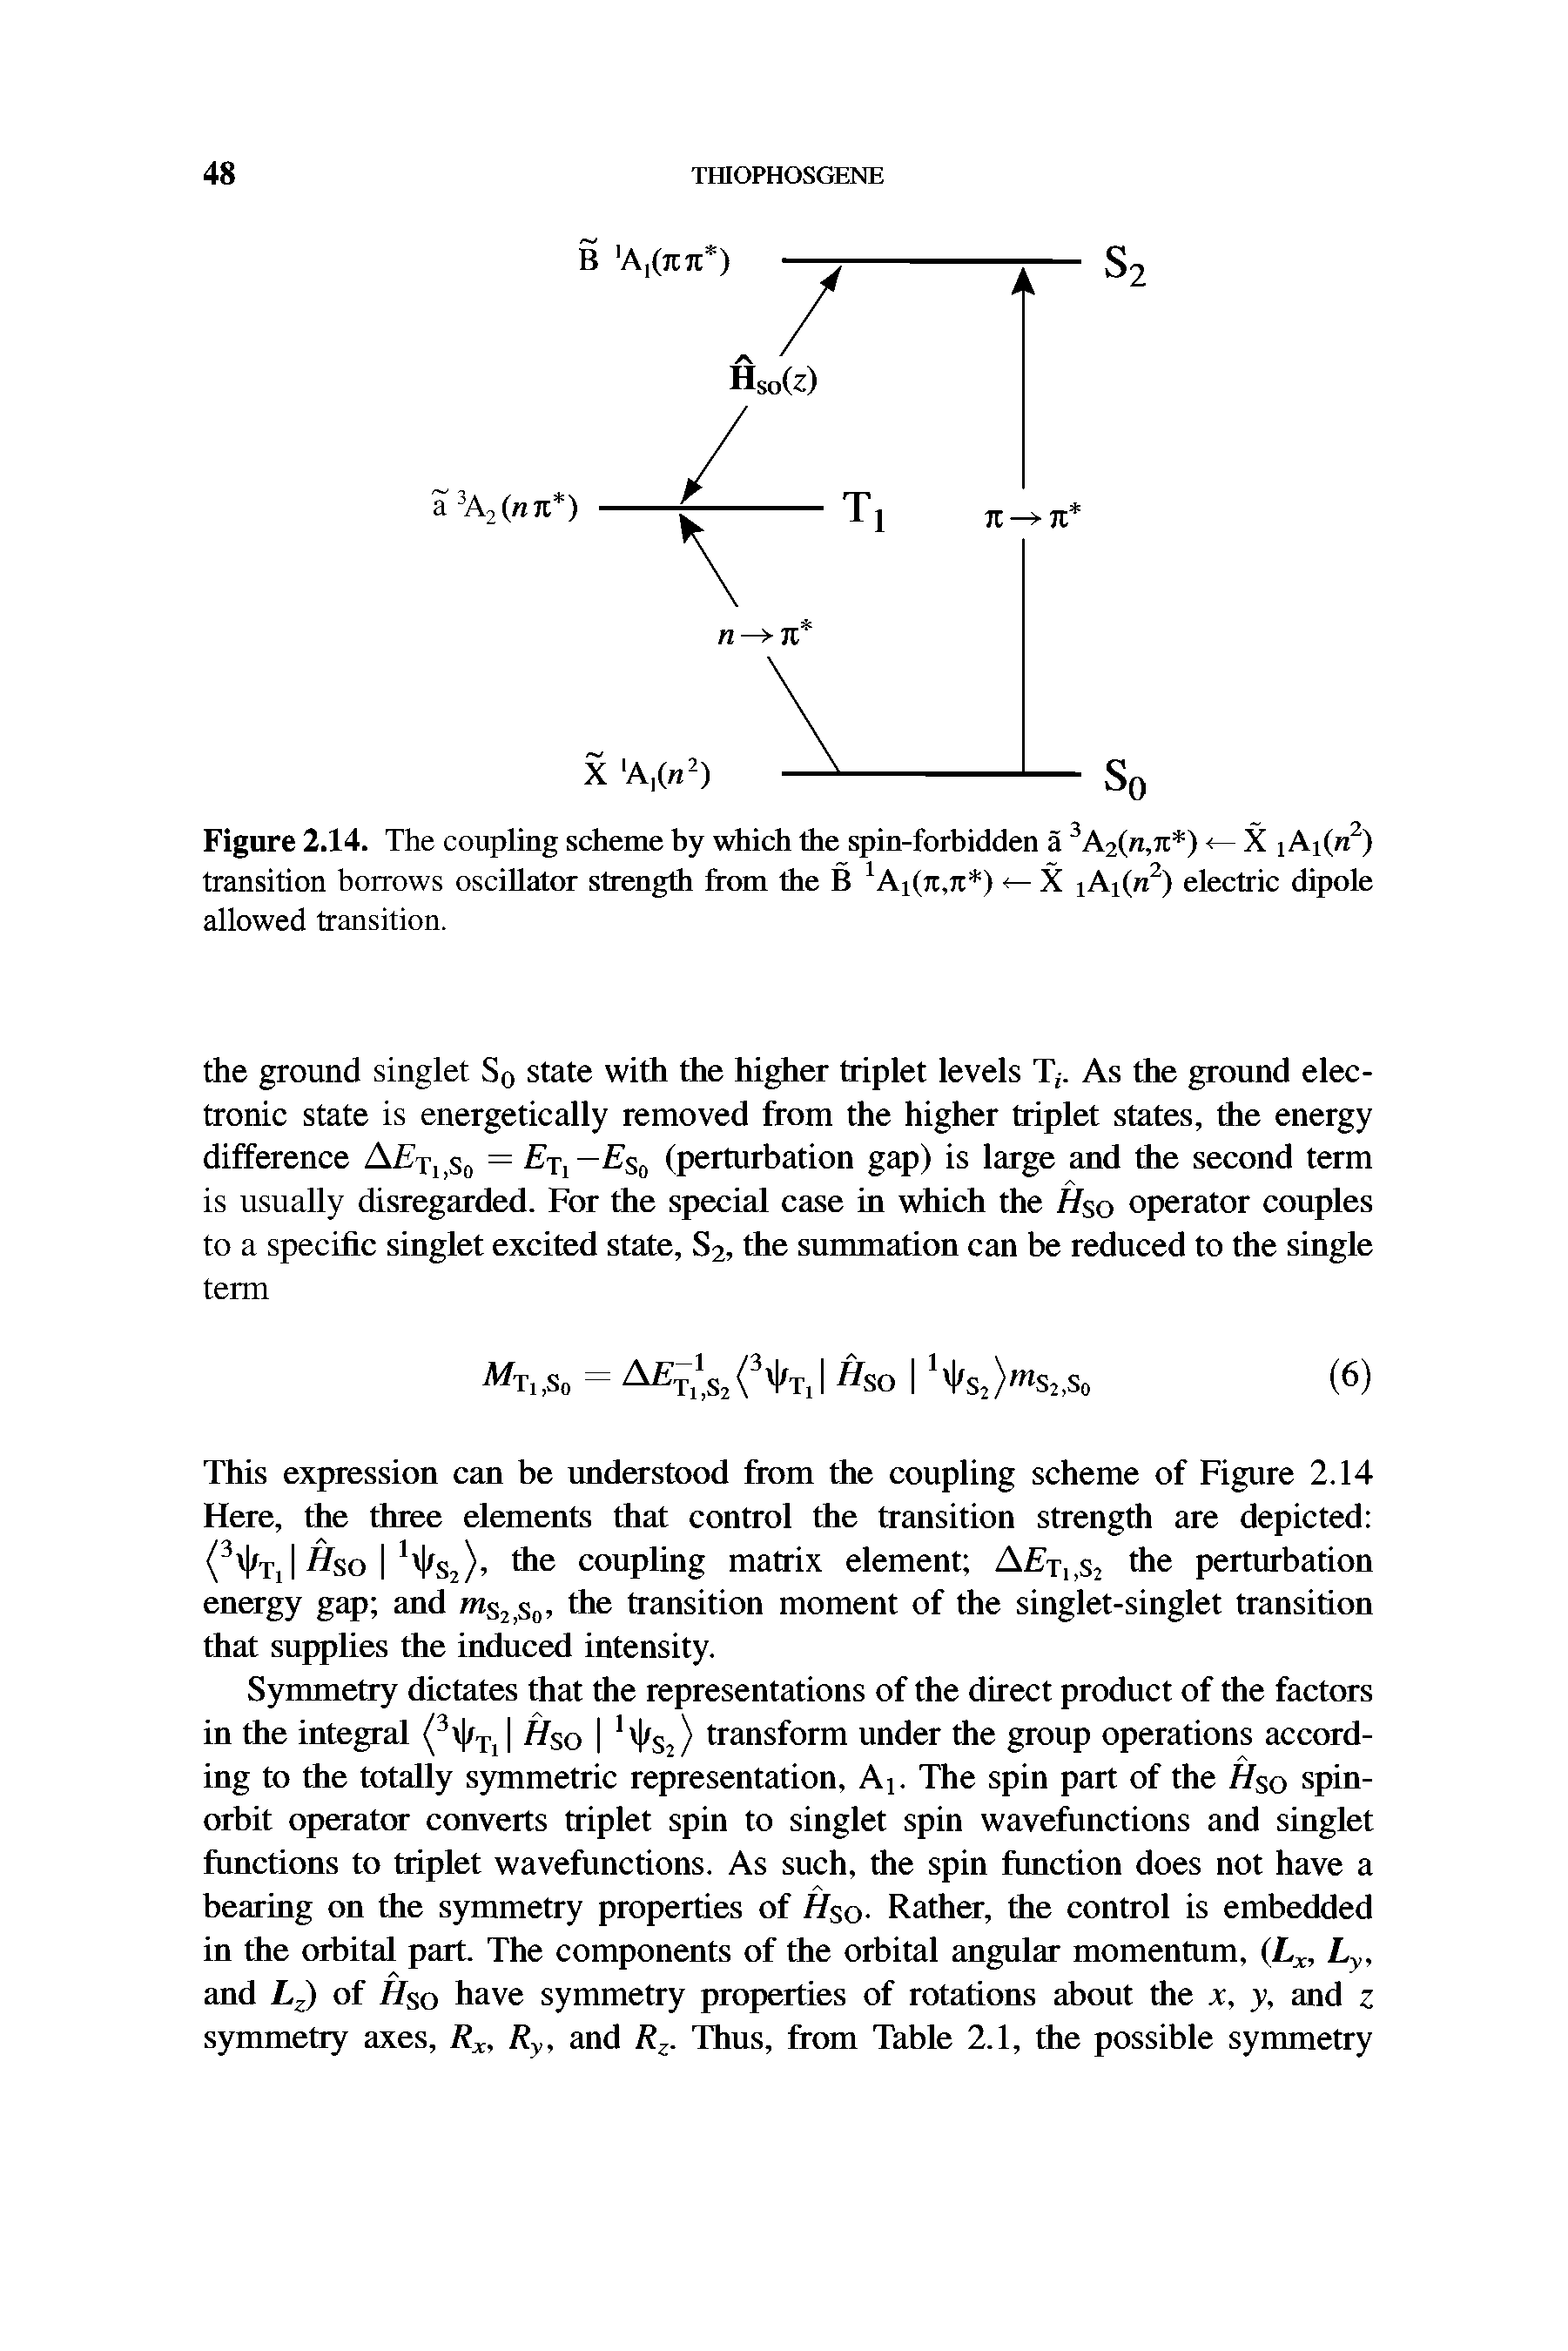 Figure 2.14. The coupling scheme by which the spin-forbidden a 3A2(rc,7t ) <— X Ai(n2) transition borrows oscillator strength from the B 1A1(jt,jt ) <— X iAi(n2) electric dipole allowed transition.